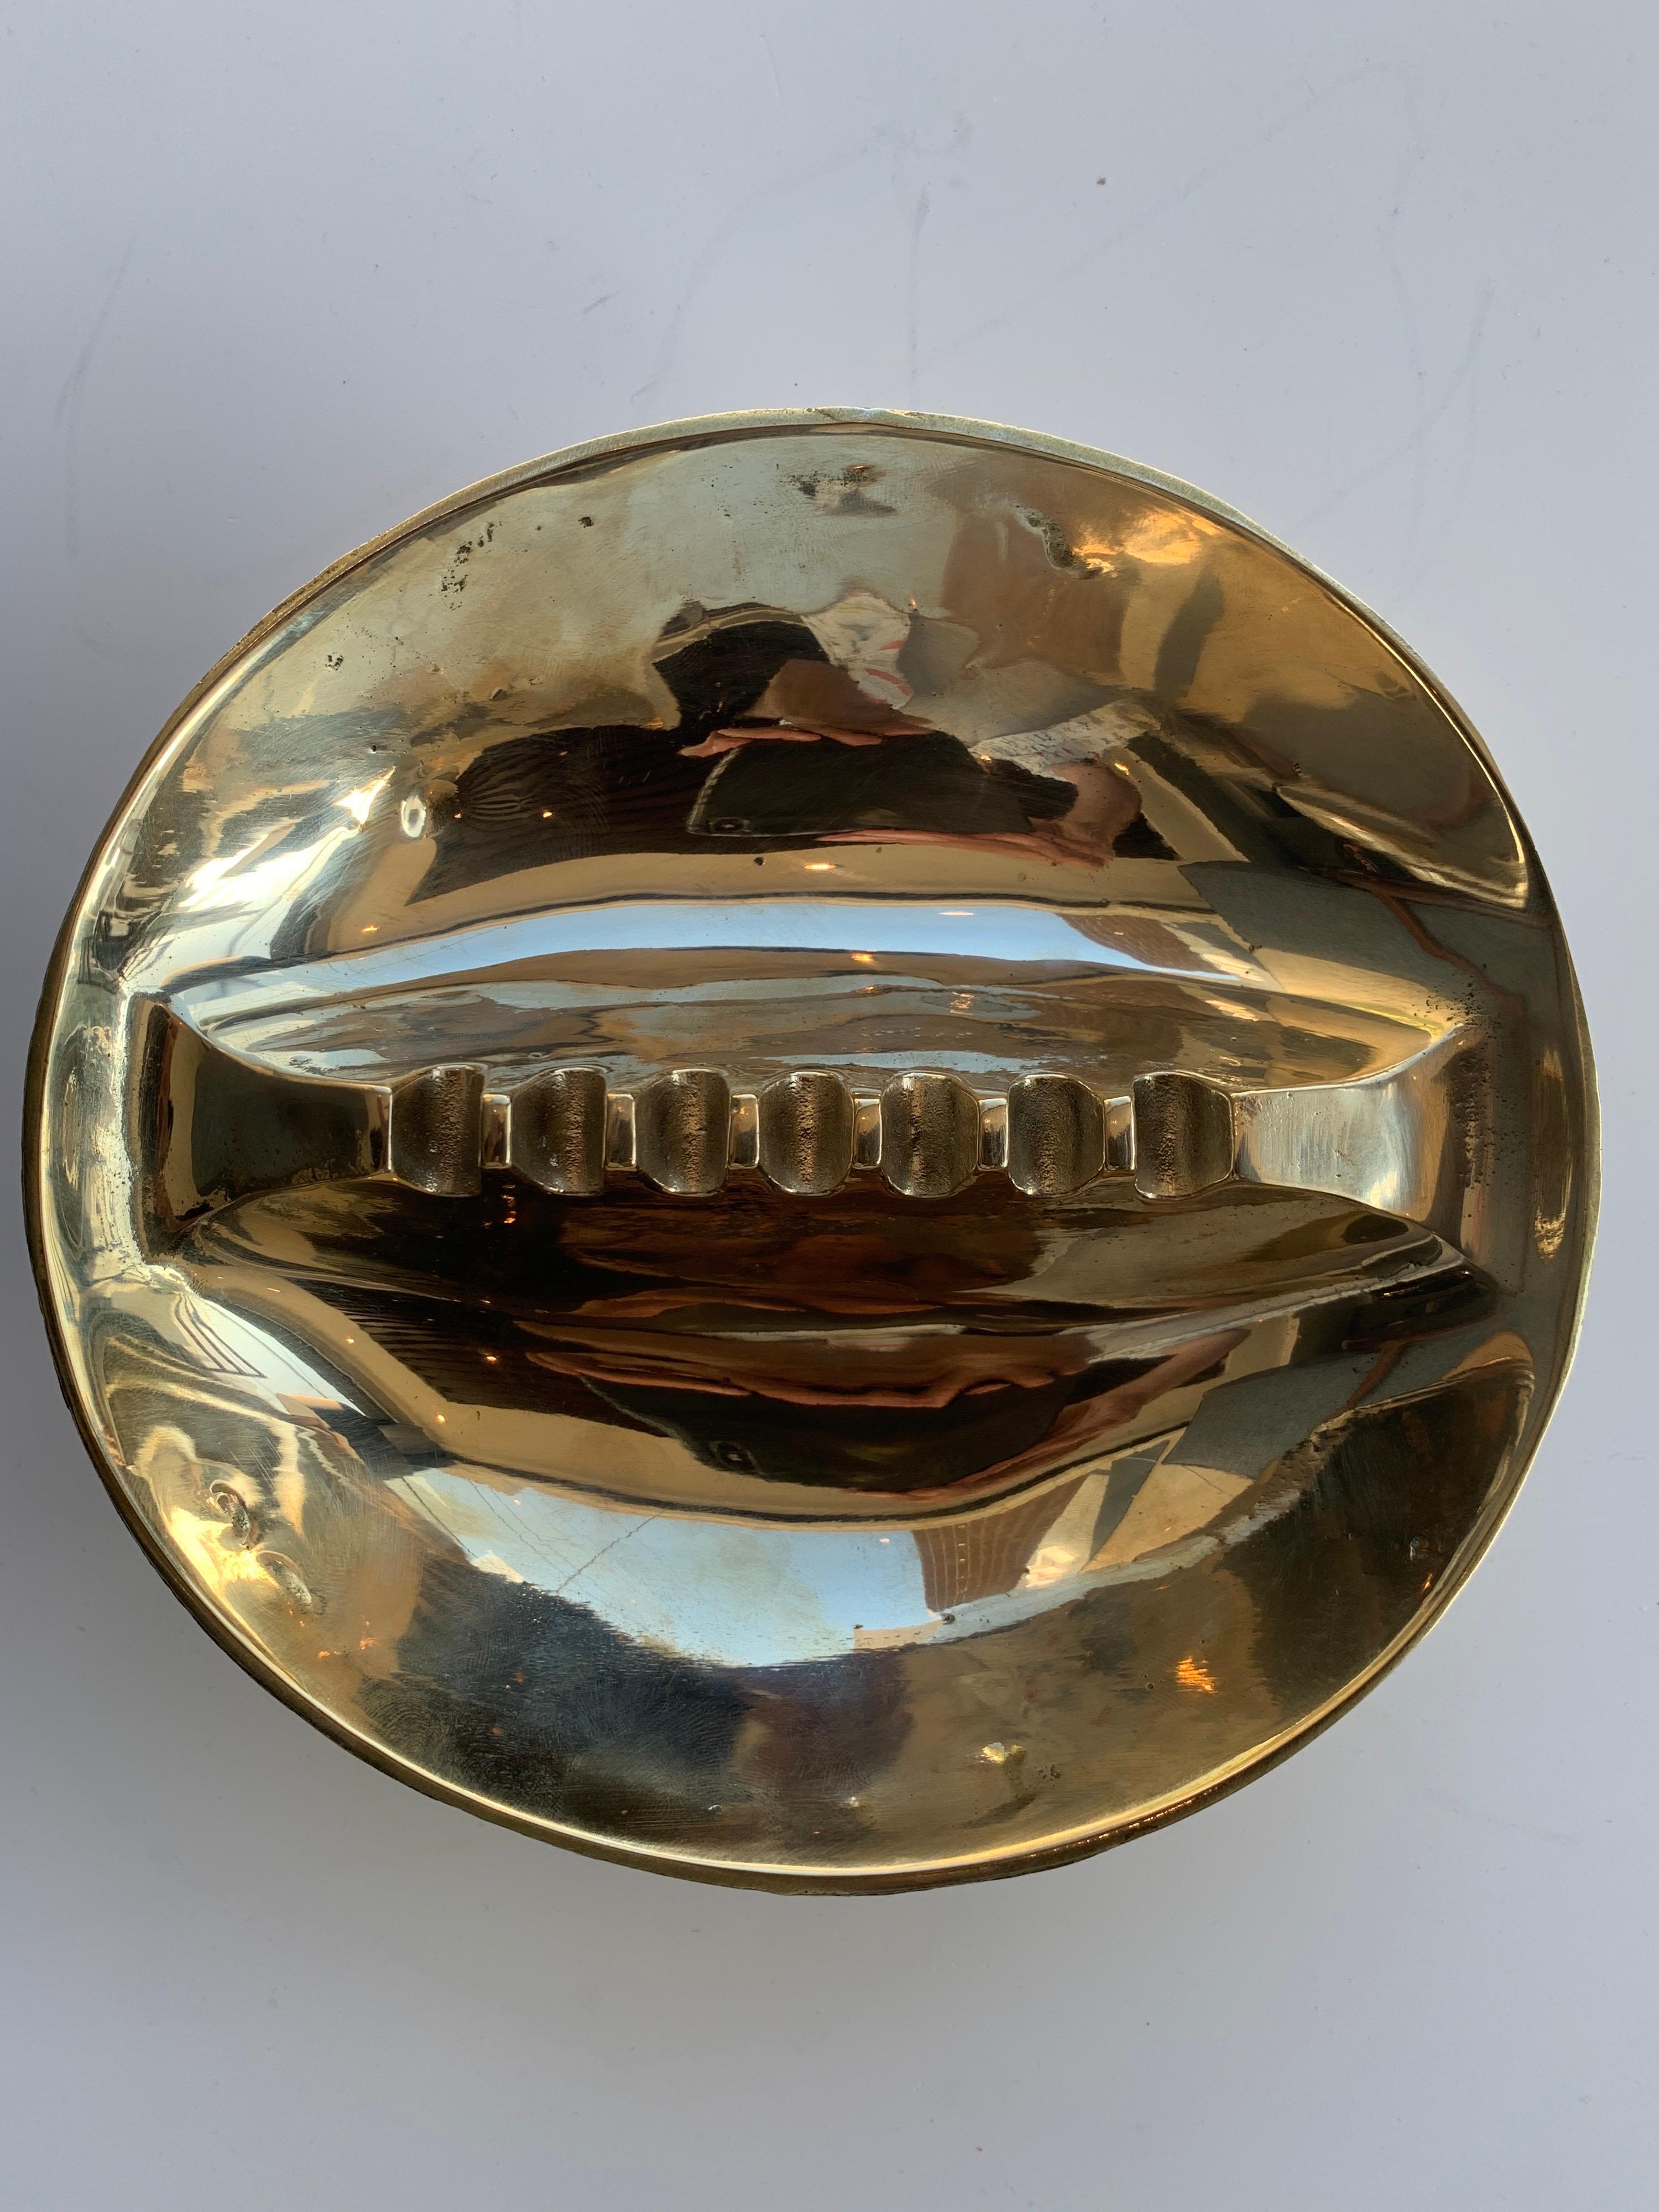 Mid-Century Modern solid brass ashtray, two pieces in stock, hand polished and look new, but from the 1960s.